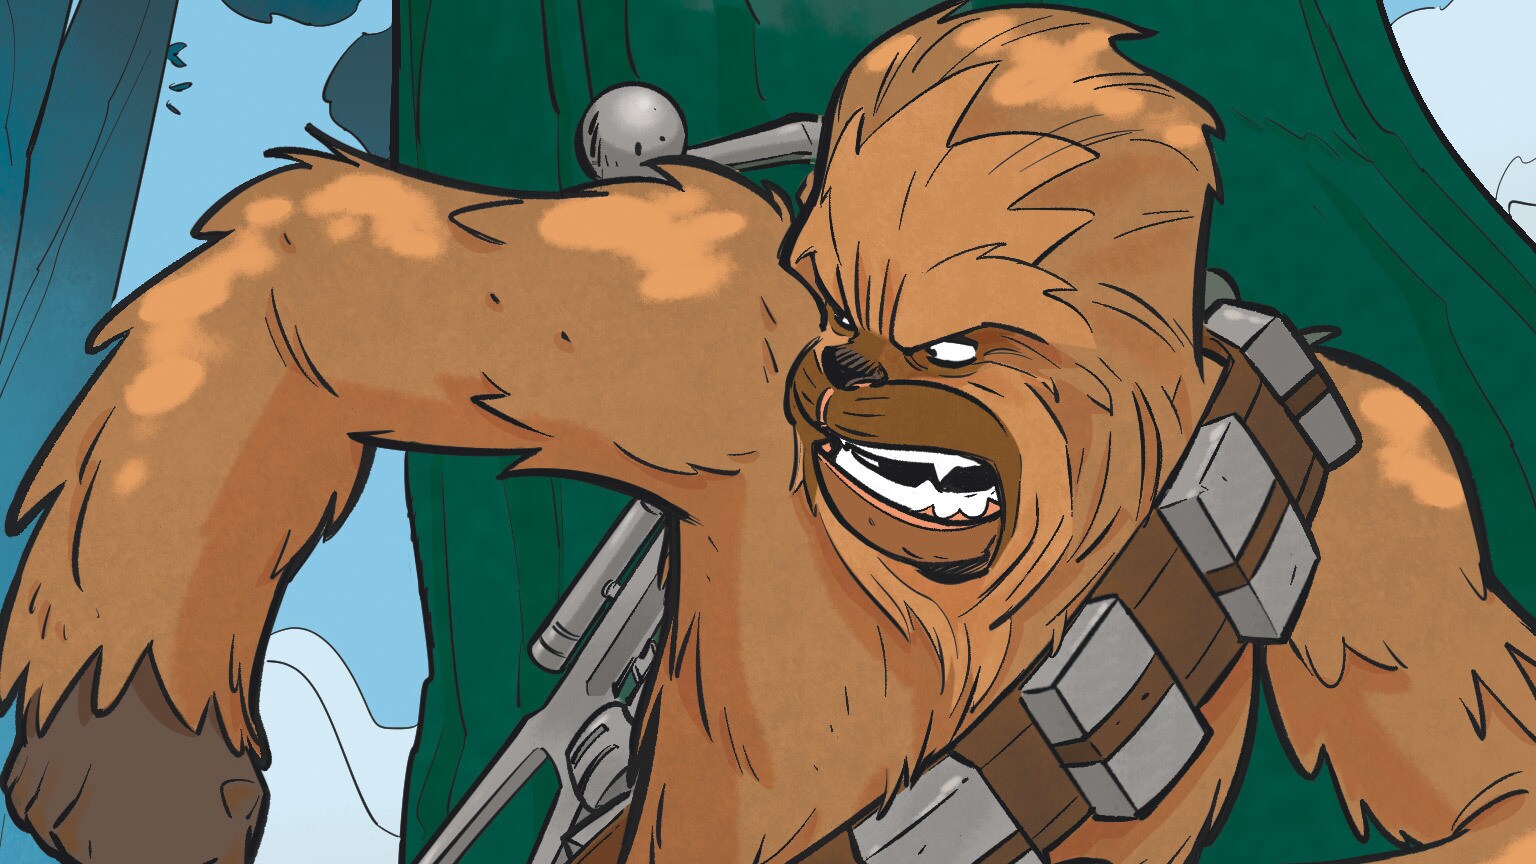 On the Prowl with Chewbacca in Star Wars Adventures #28 - Exclusive